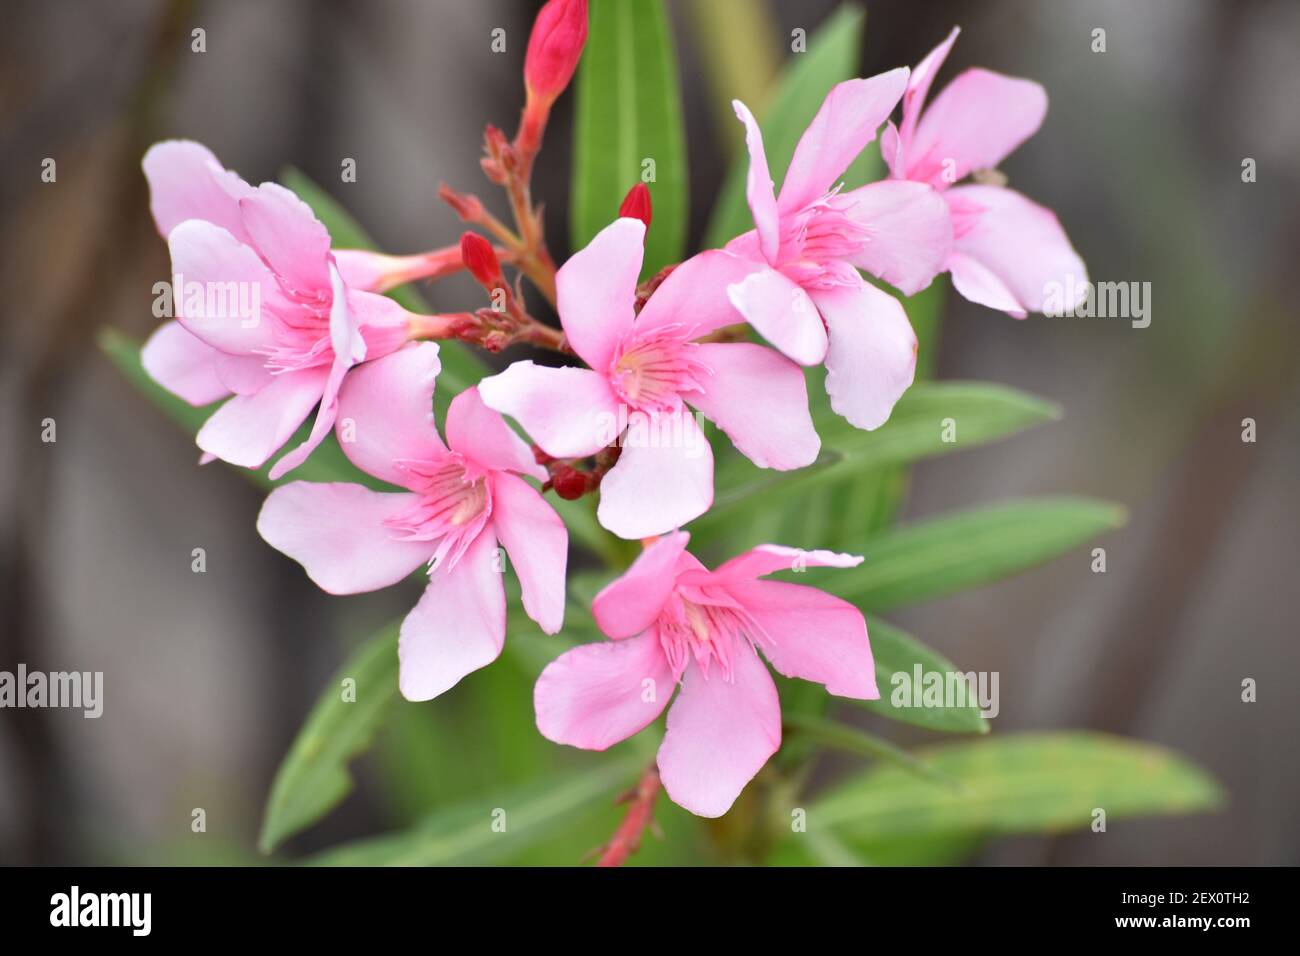 Kaner flowers commonly known as Nerium or oleander. Superficial resemblance to the unrelated olive Olea. Pune, Maharashtra, India. Stock Photo